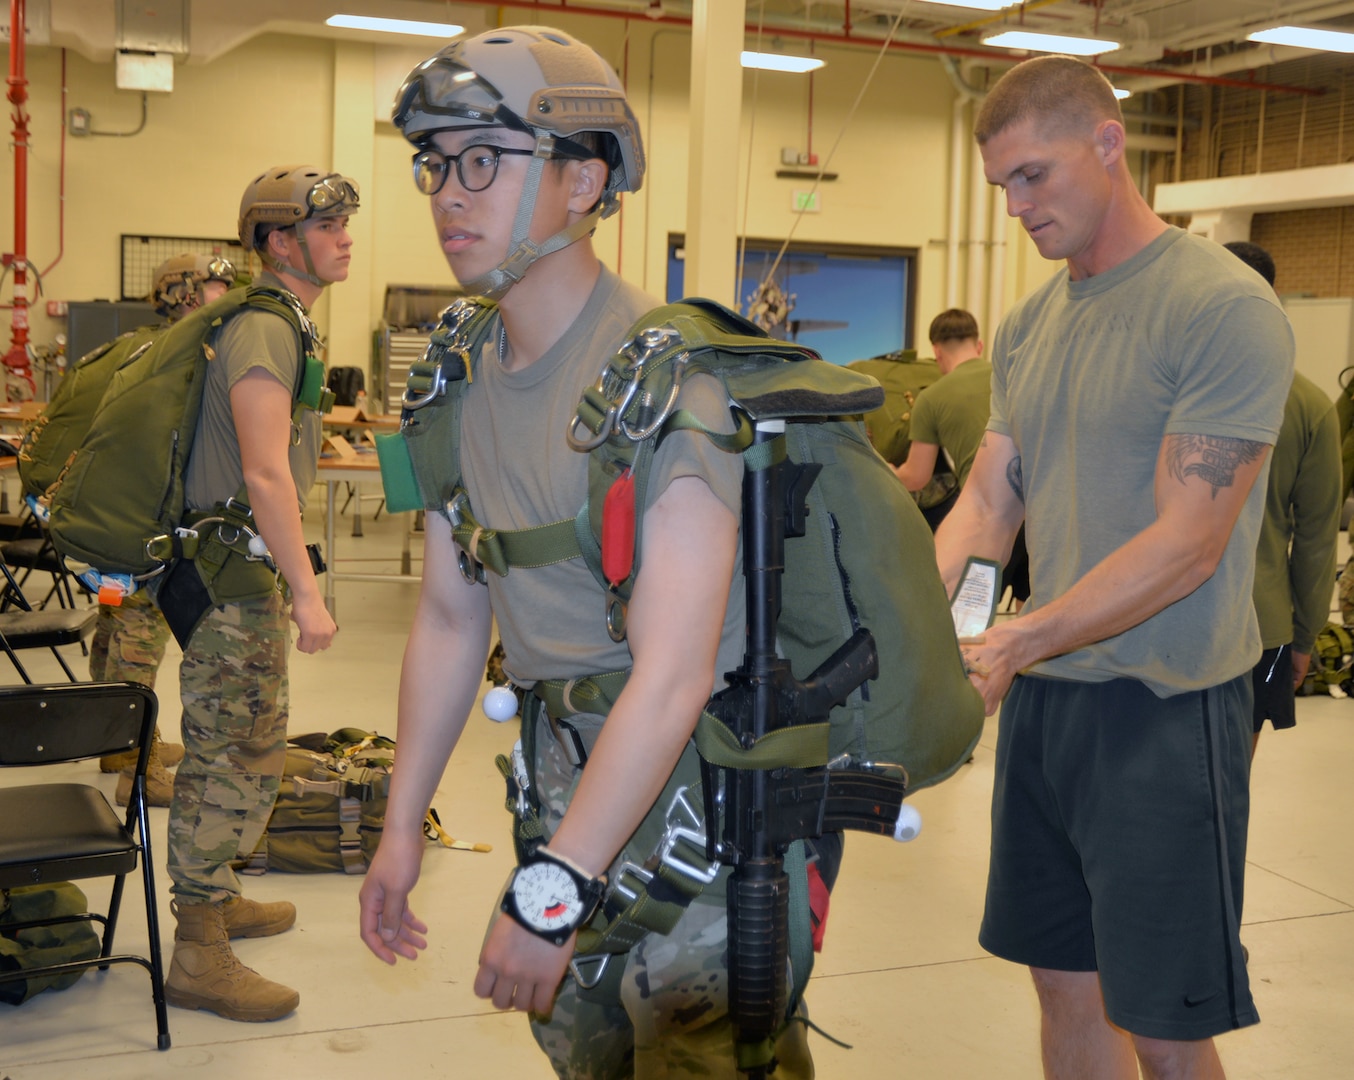 Staff Sgt. Jack Hausmann (right), 1st Reconnaissance Battalion reconnaissance Marine, conducts an inspection of military free-fall jumping equipment worn by Army Pvt. Tran Richard during a training session in the Marine Military Free-Fall Jumpmaster Course held at the 4th Reconnaissance Battalion, located at Joint Base San Antonio-Fort Sam Houston. The course started Jan. 29 and runs until Feb. 16. Students who complete the course become certified Military Free-Fall Jumpmasters, who oversee every aspect of military free-fall operations, including planning, execution and recovery.